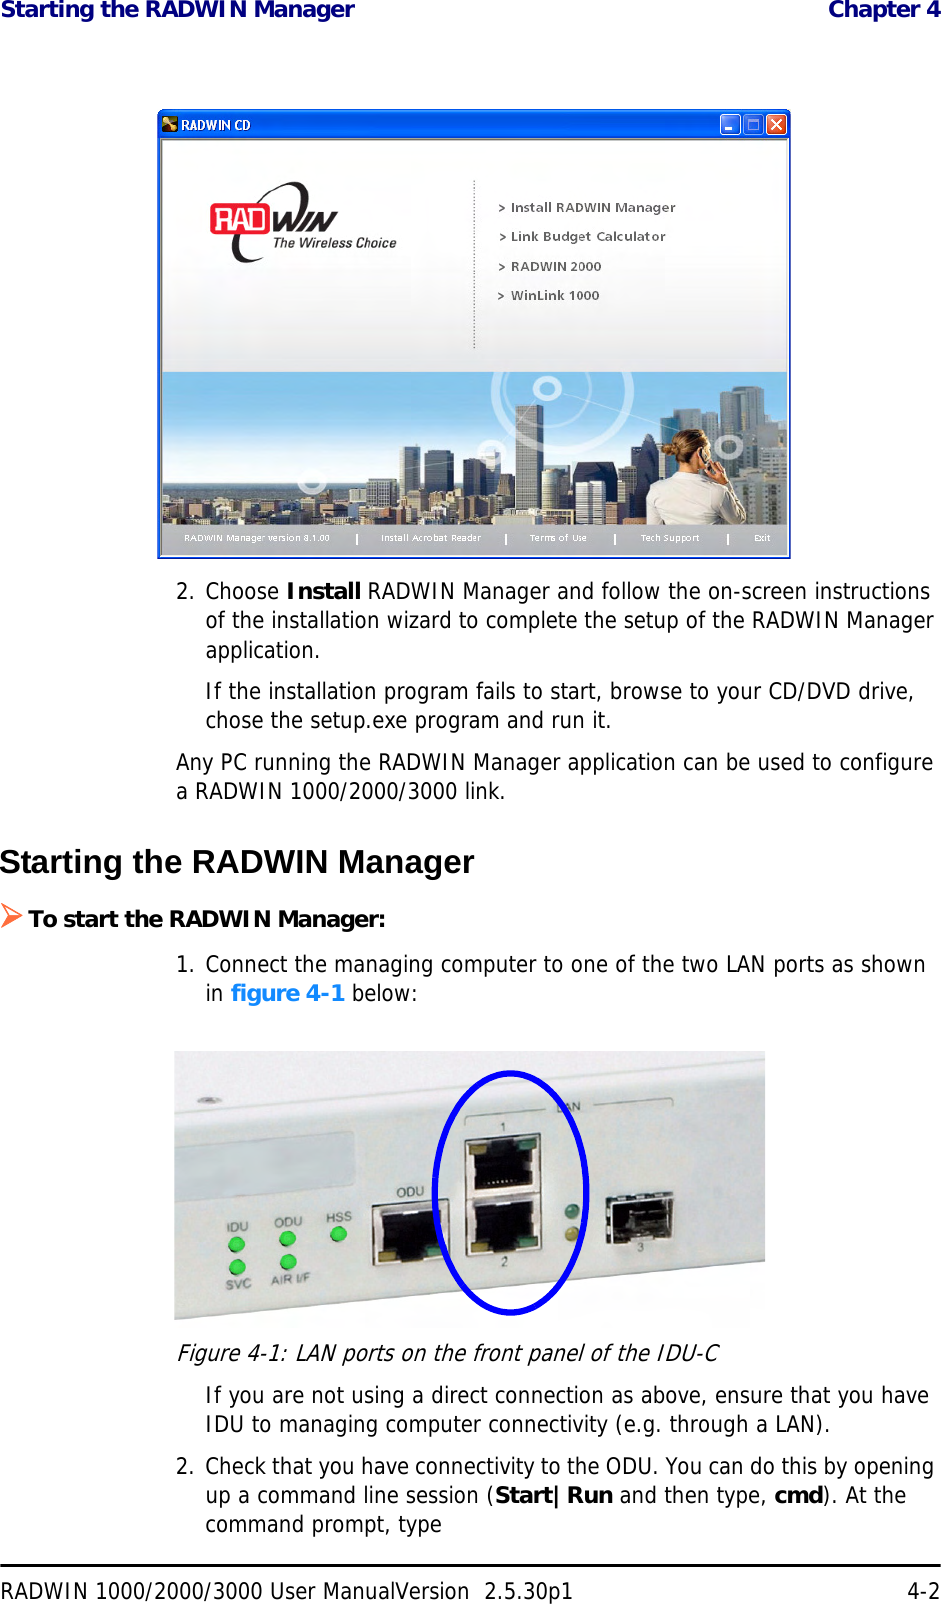 Starting the RADWIN Manager  Chapter 4RADWIN 1000/2000/3000 User ManualVersion  2.5.30p1 4-22. Choose Install RADWIN Manager and follow the on-screen instructions of the installation wizard to complete the setup of the RADWIN Manager application.If the installation program fails to start, browse to your CD/DVD drive, chose the setup.exe program and run it.Any PC running the RADWIN Manager application can be used to configure a RADWIN 1000/2000/3000 link.Starting the RADWIN Manager ¾To start the RADWIN Manager:1. Connect the managing computer to one of the two LAN ports as shown in figure 4-1 below:Figure 4-1: LAN ports on the front panel of the IDU-CIf you are not using a direct connection as above, ensure that you have IDU to managing computer connectivity (e.g. through a LAN).2. Check that you have connectivity to the ODU. You can do this by opening up a command line session (Start|Run and then type, cmd). At the command prompt, type